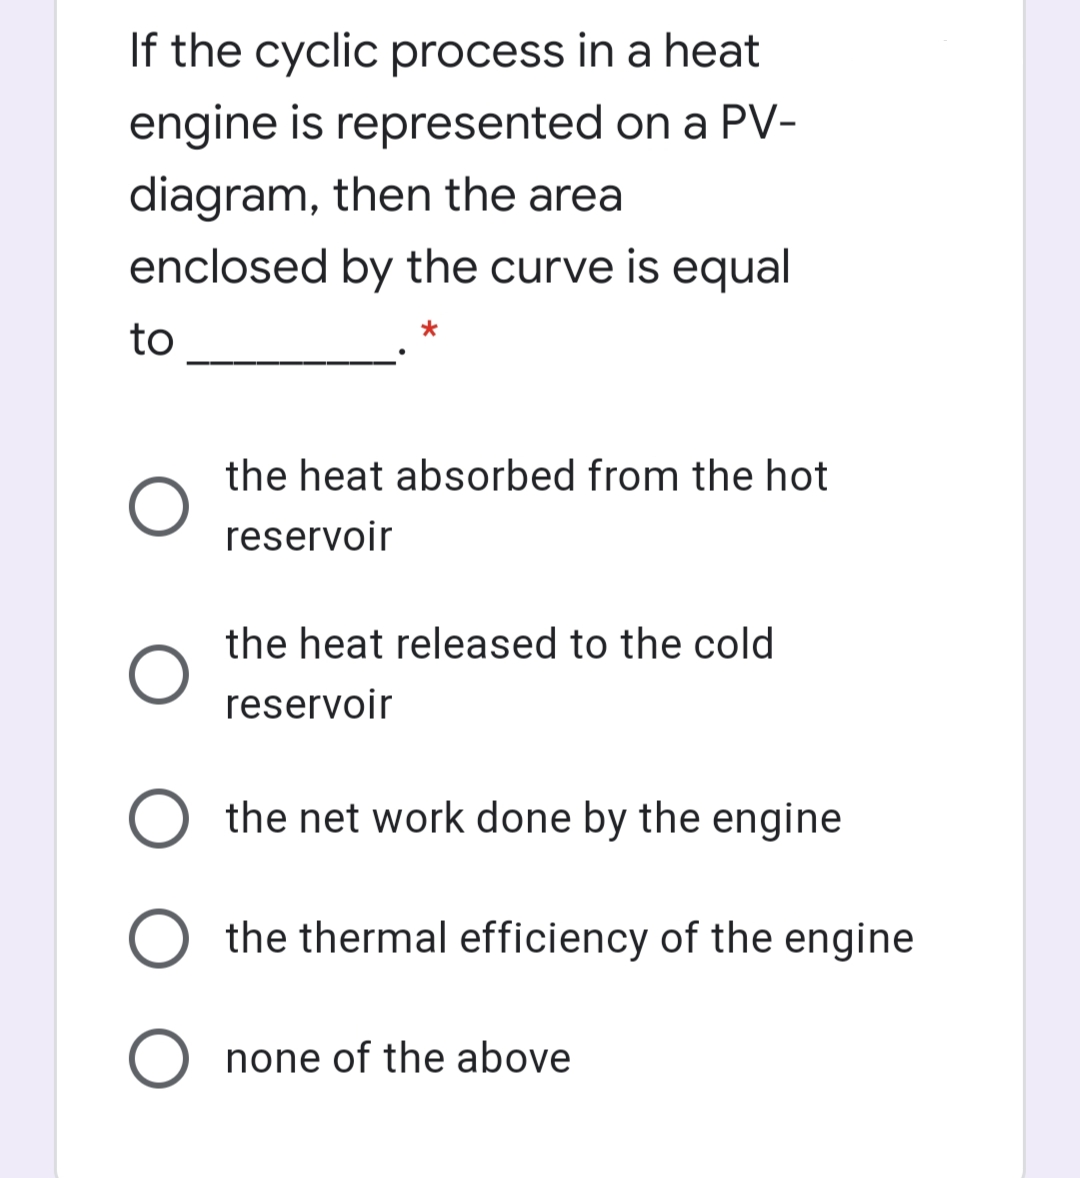 If the cyclic process in a heat
engine is represented on a PV-
diagram, then the area
enclosed by the curve is equal
to
the heat absorbed from the hot
reservoir
the heat released to the cold
reservoir
the net work done by the engine
the thermal efficiency of the engine
O none of the above
